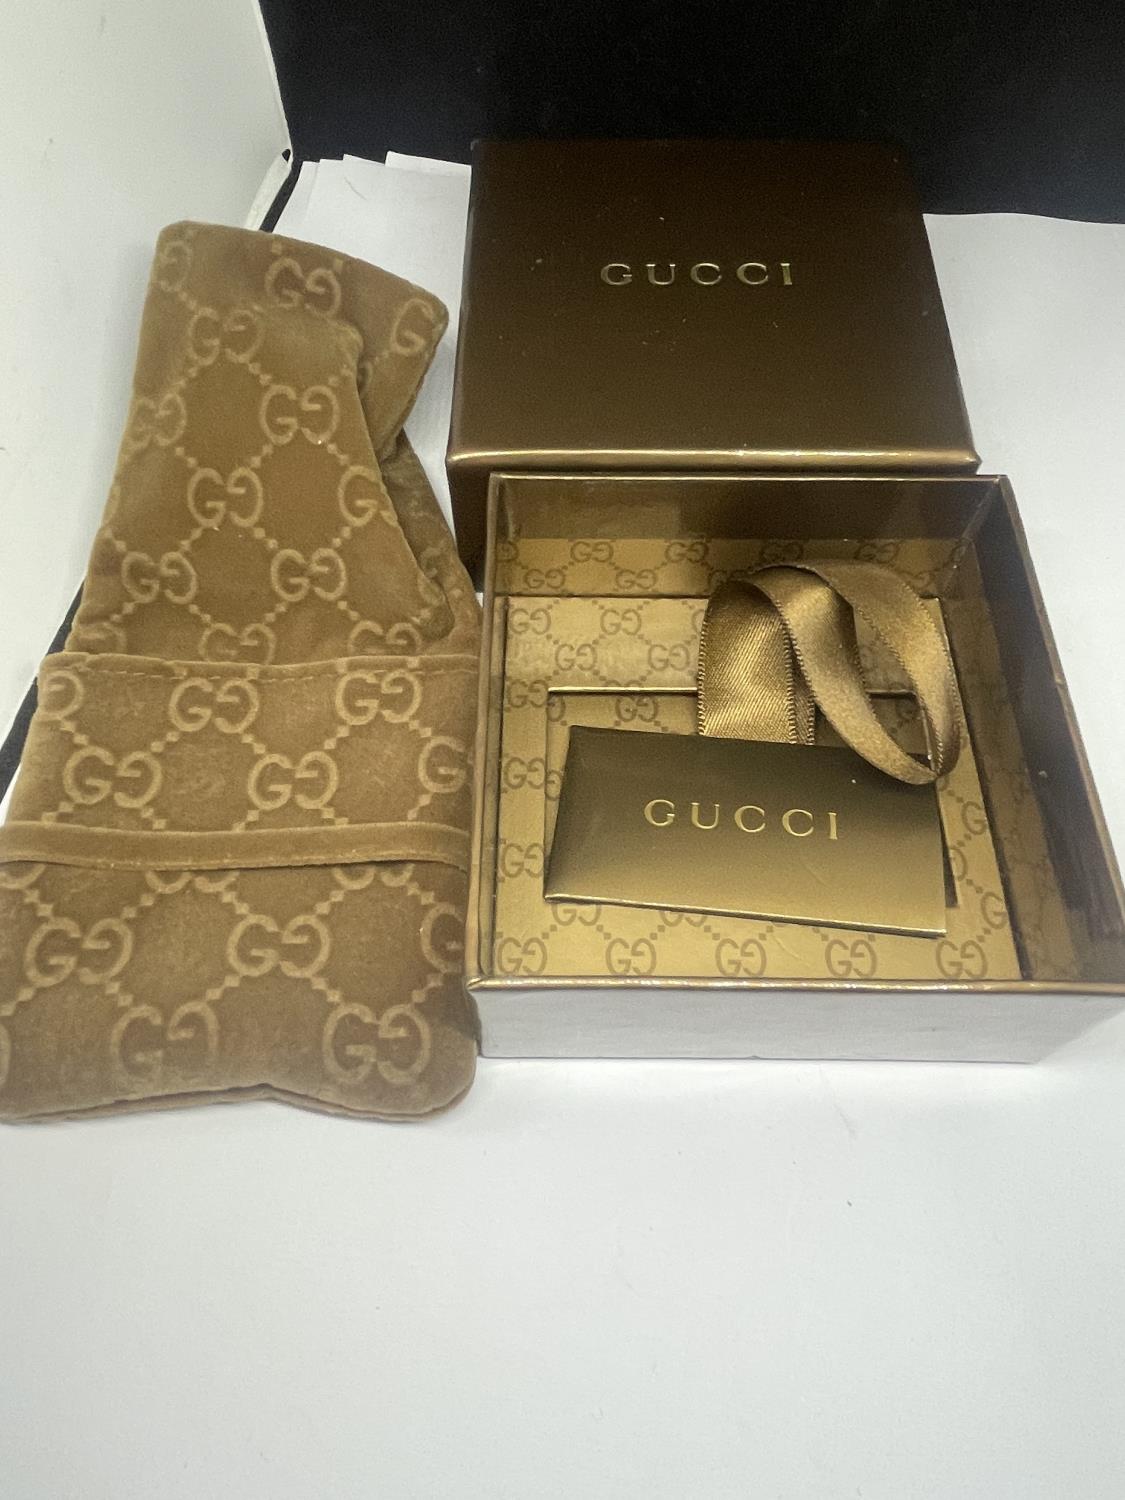 A GUCCI SILVER NECKLACE WITH POUCH AND PRESENTATION BOX - Image 5 of 5